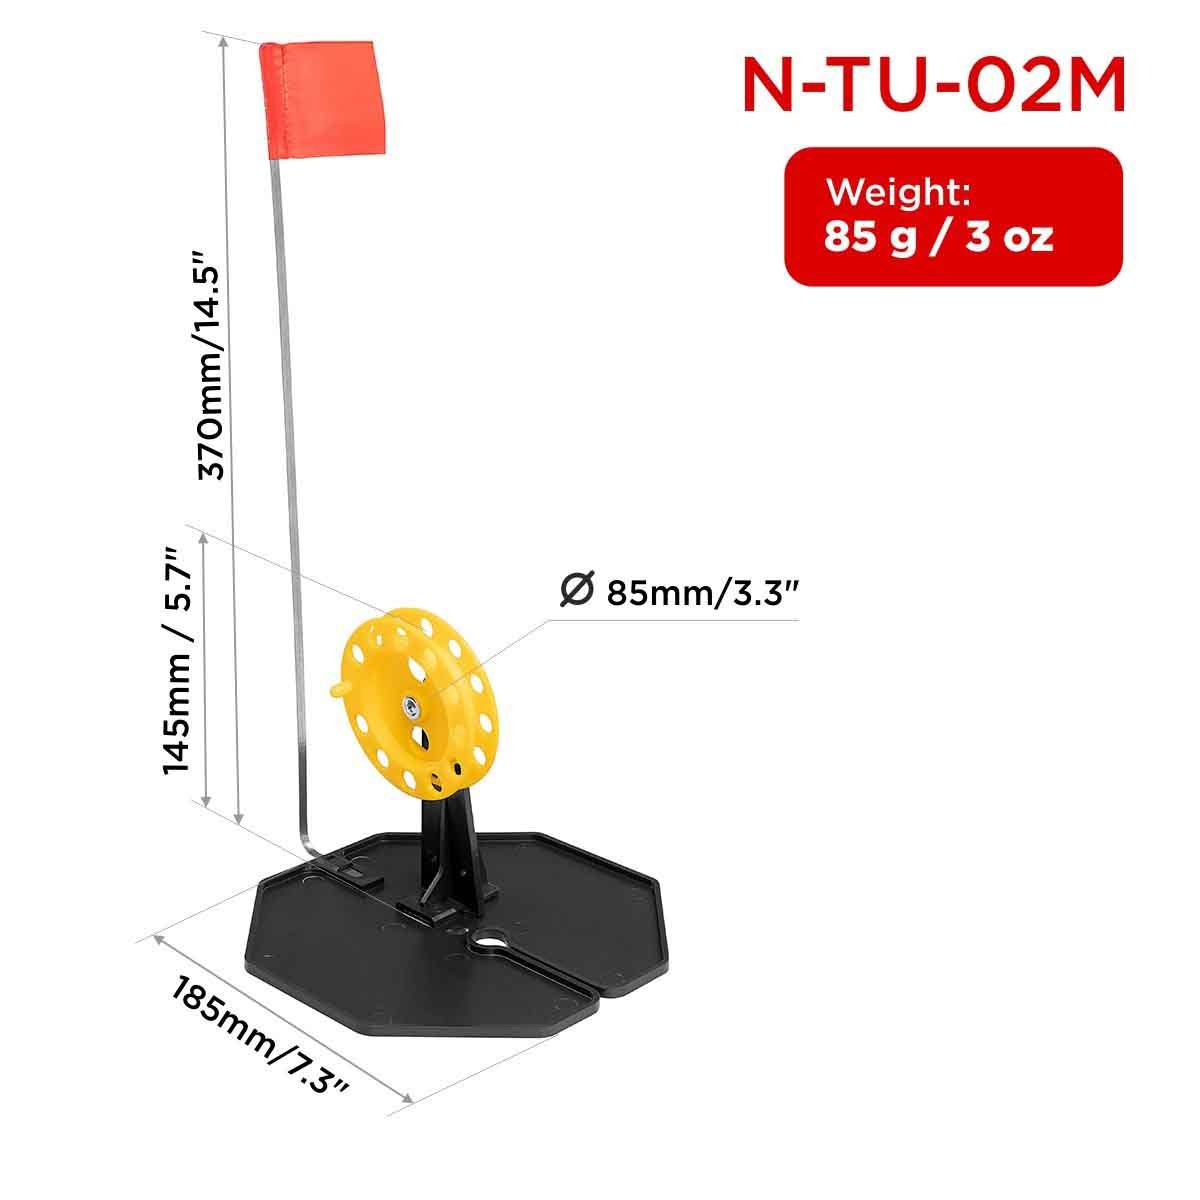 Tip-up Pop-Up Integrated Hole-Cover Easy to Clip N-Tu-02M weighs 3 oz, the base is 7.3 inches long, the flag shaft is 14.5 inches, the spool diameter is 3.3 inches and its height is 5.7 inches